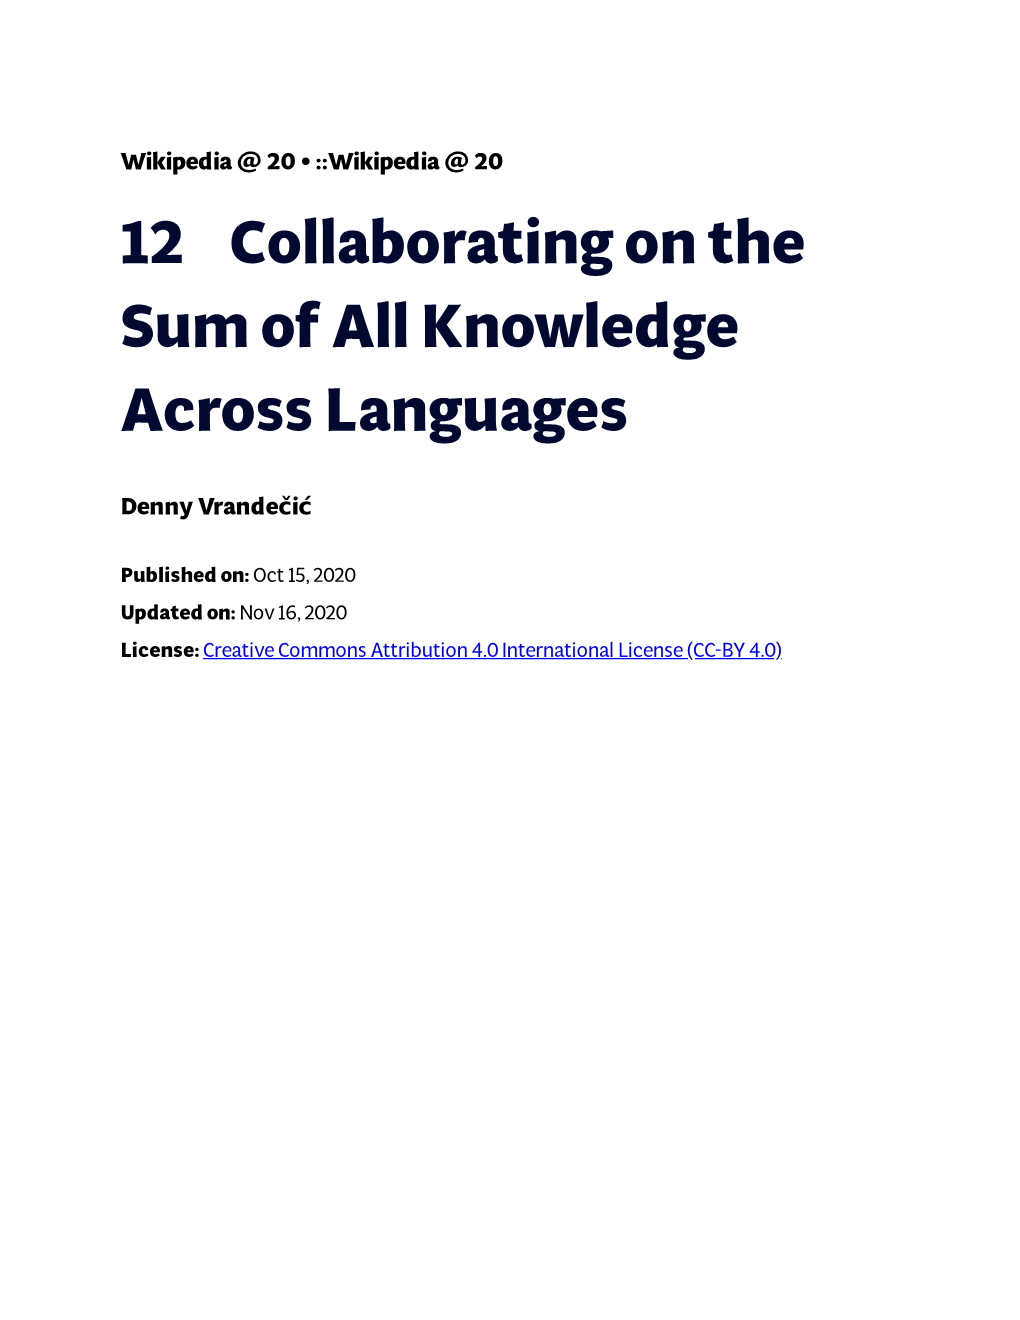 12€€€€Collaborating on the Sum of All Knowledge Across Languages